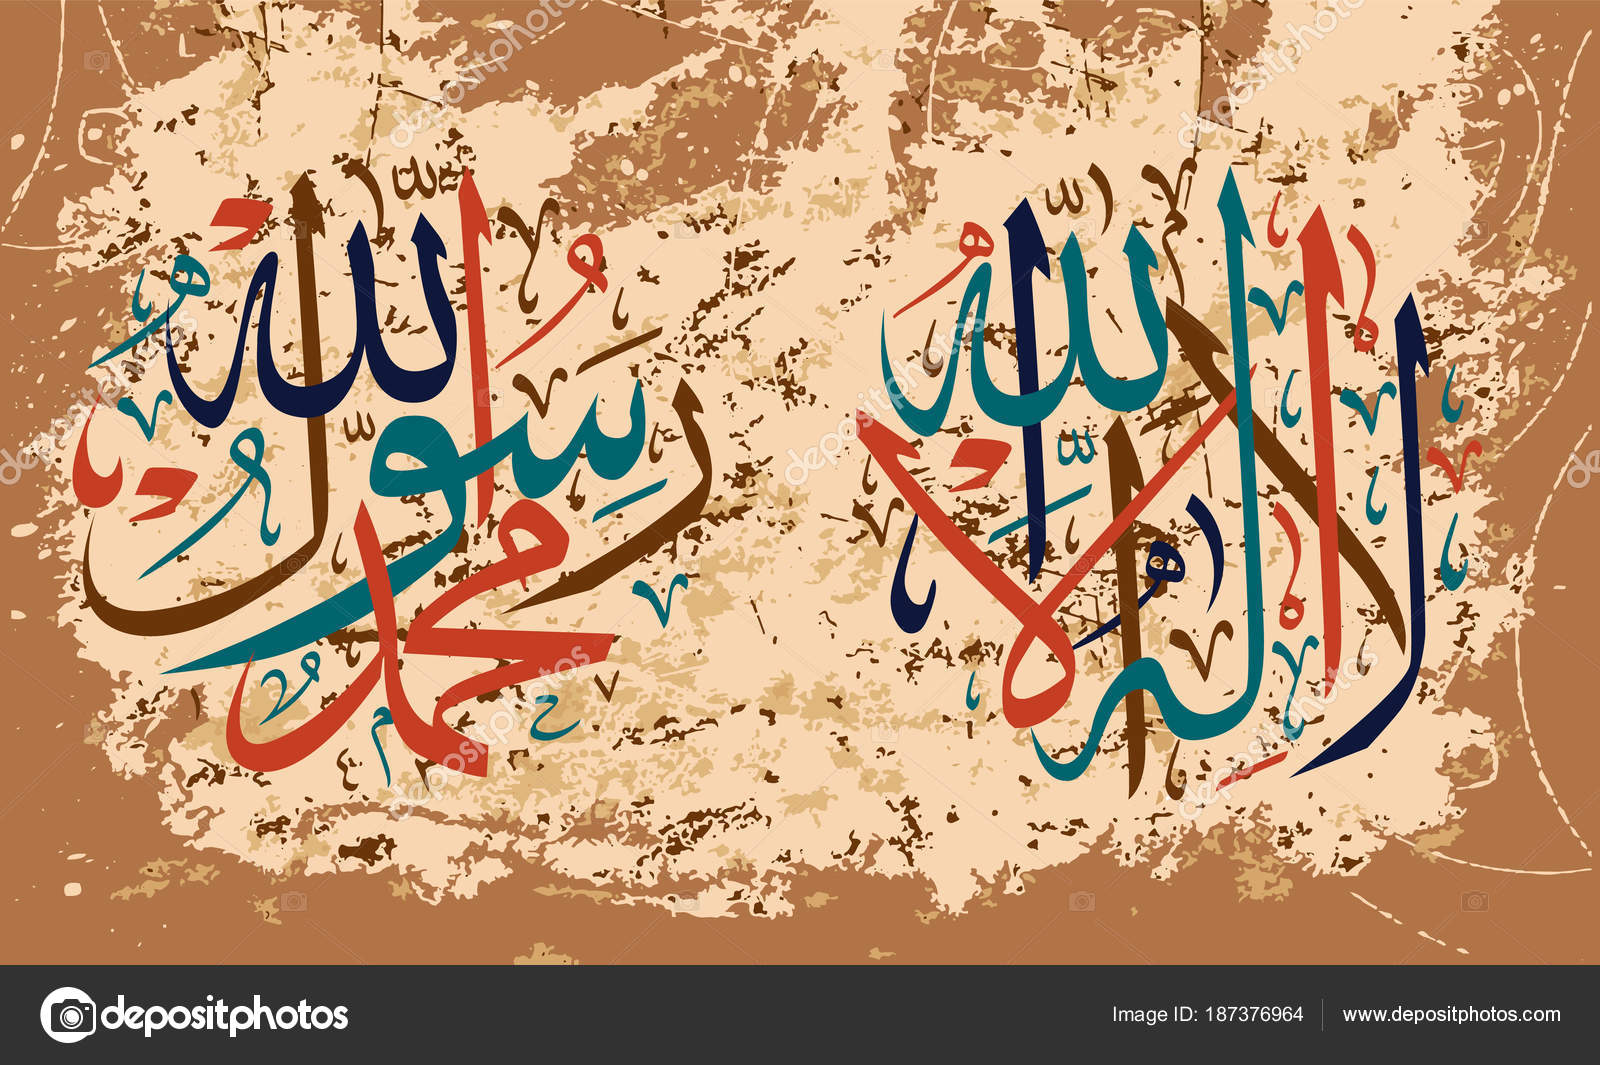 La Ilaha Illallah Muhammadur Rasulullah For The Design Of Islamic Holidays This Colligraphy Means There Is No God Worthy Of Worship Except Allah And Muhammad Is His Messenger Stock Vector Image By C Zamir